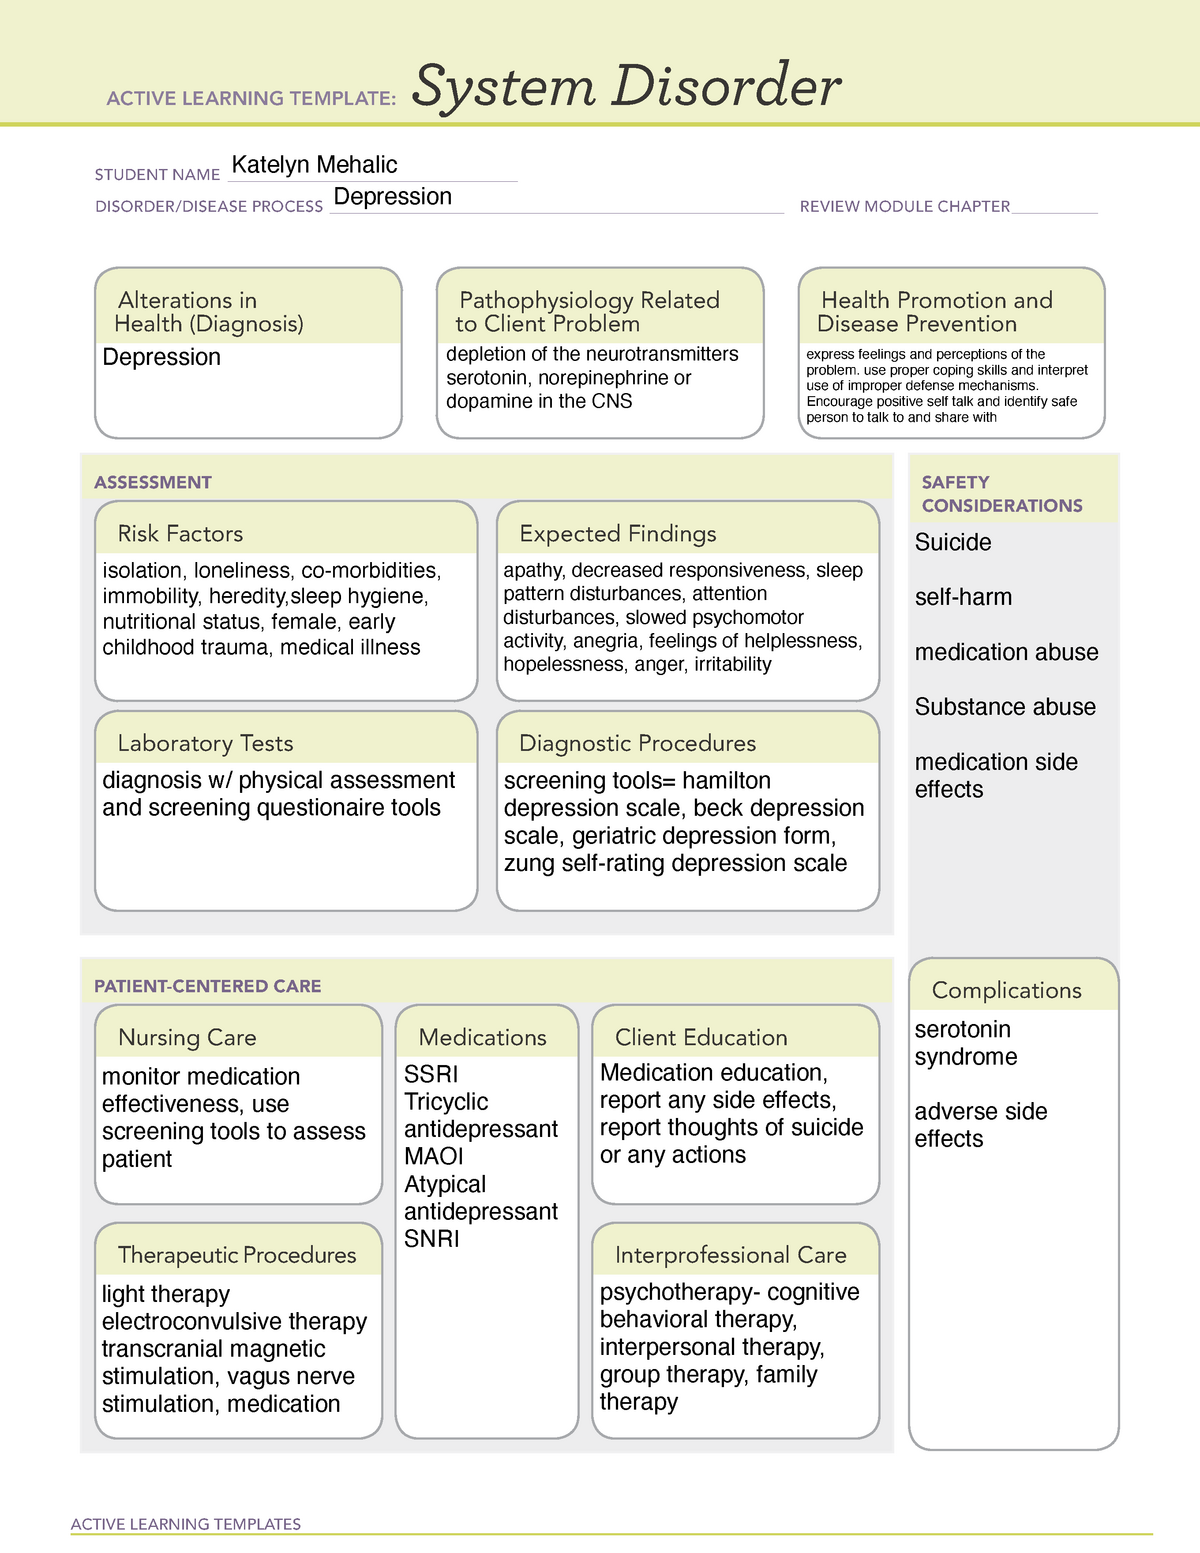 Depression system disorder ACTIVE LEARNING TEMPLATES System Disorder